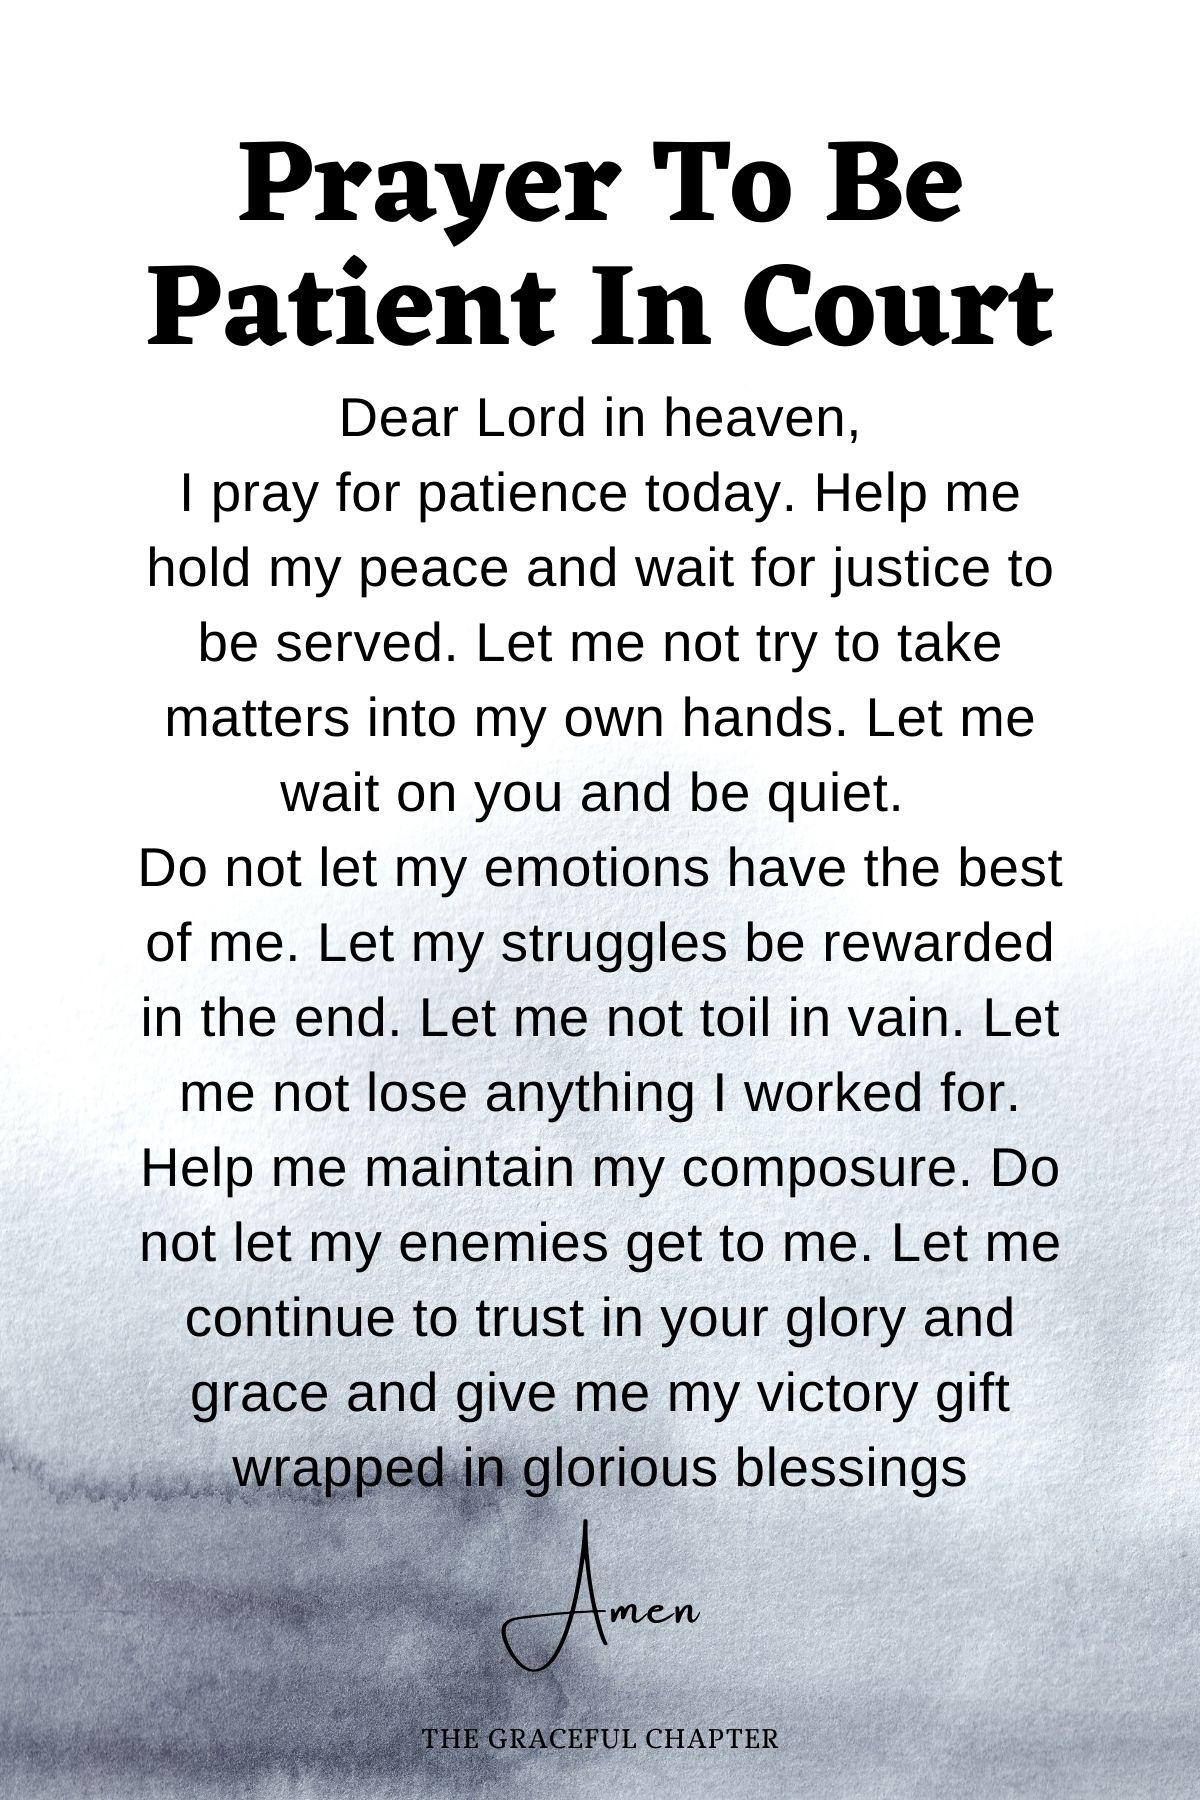 Prayer to be patient in court